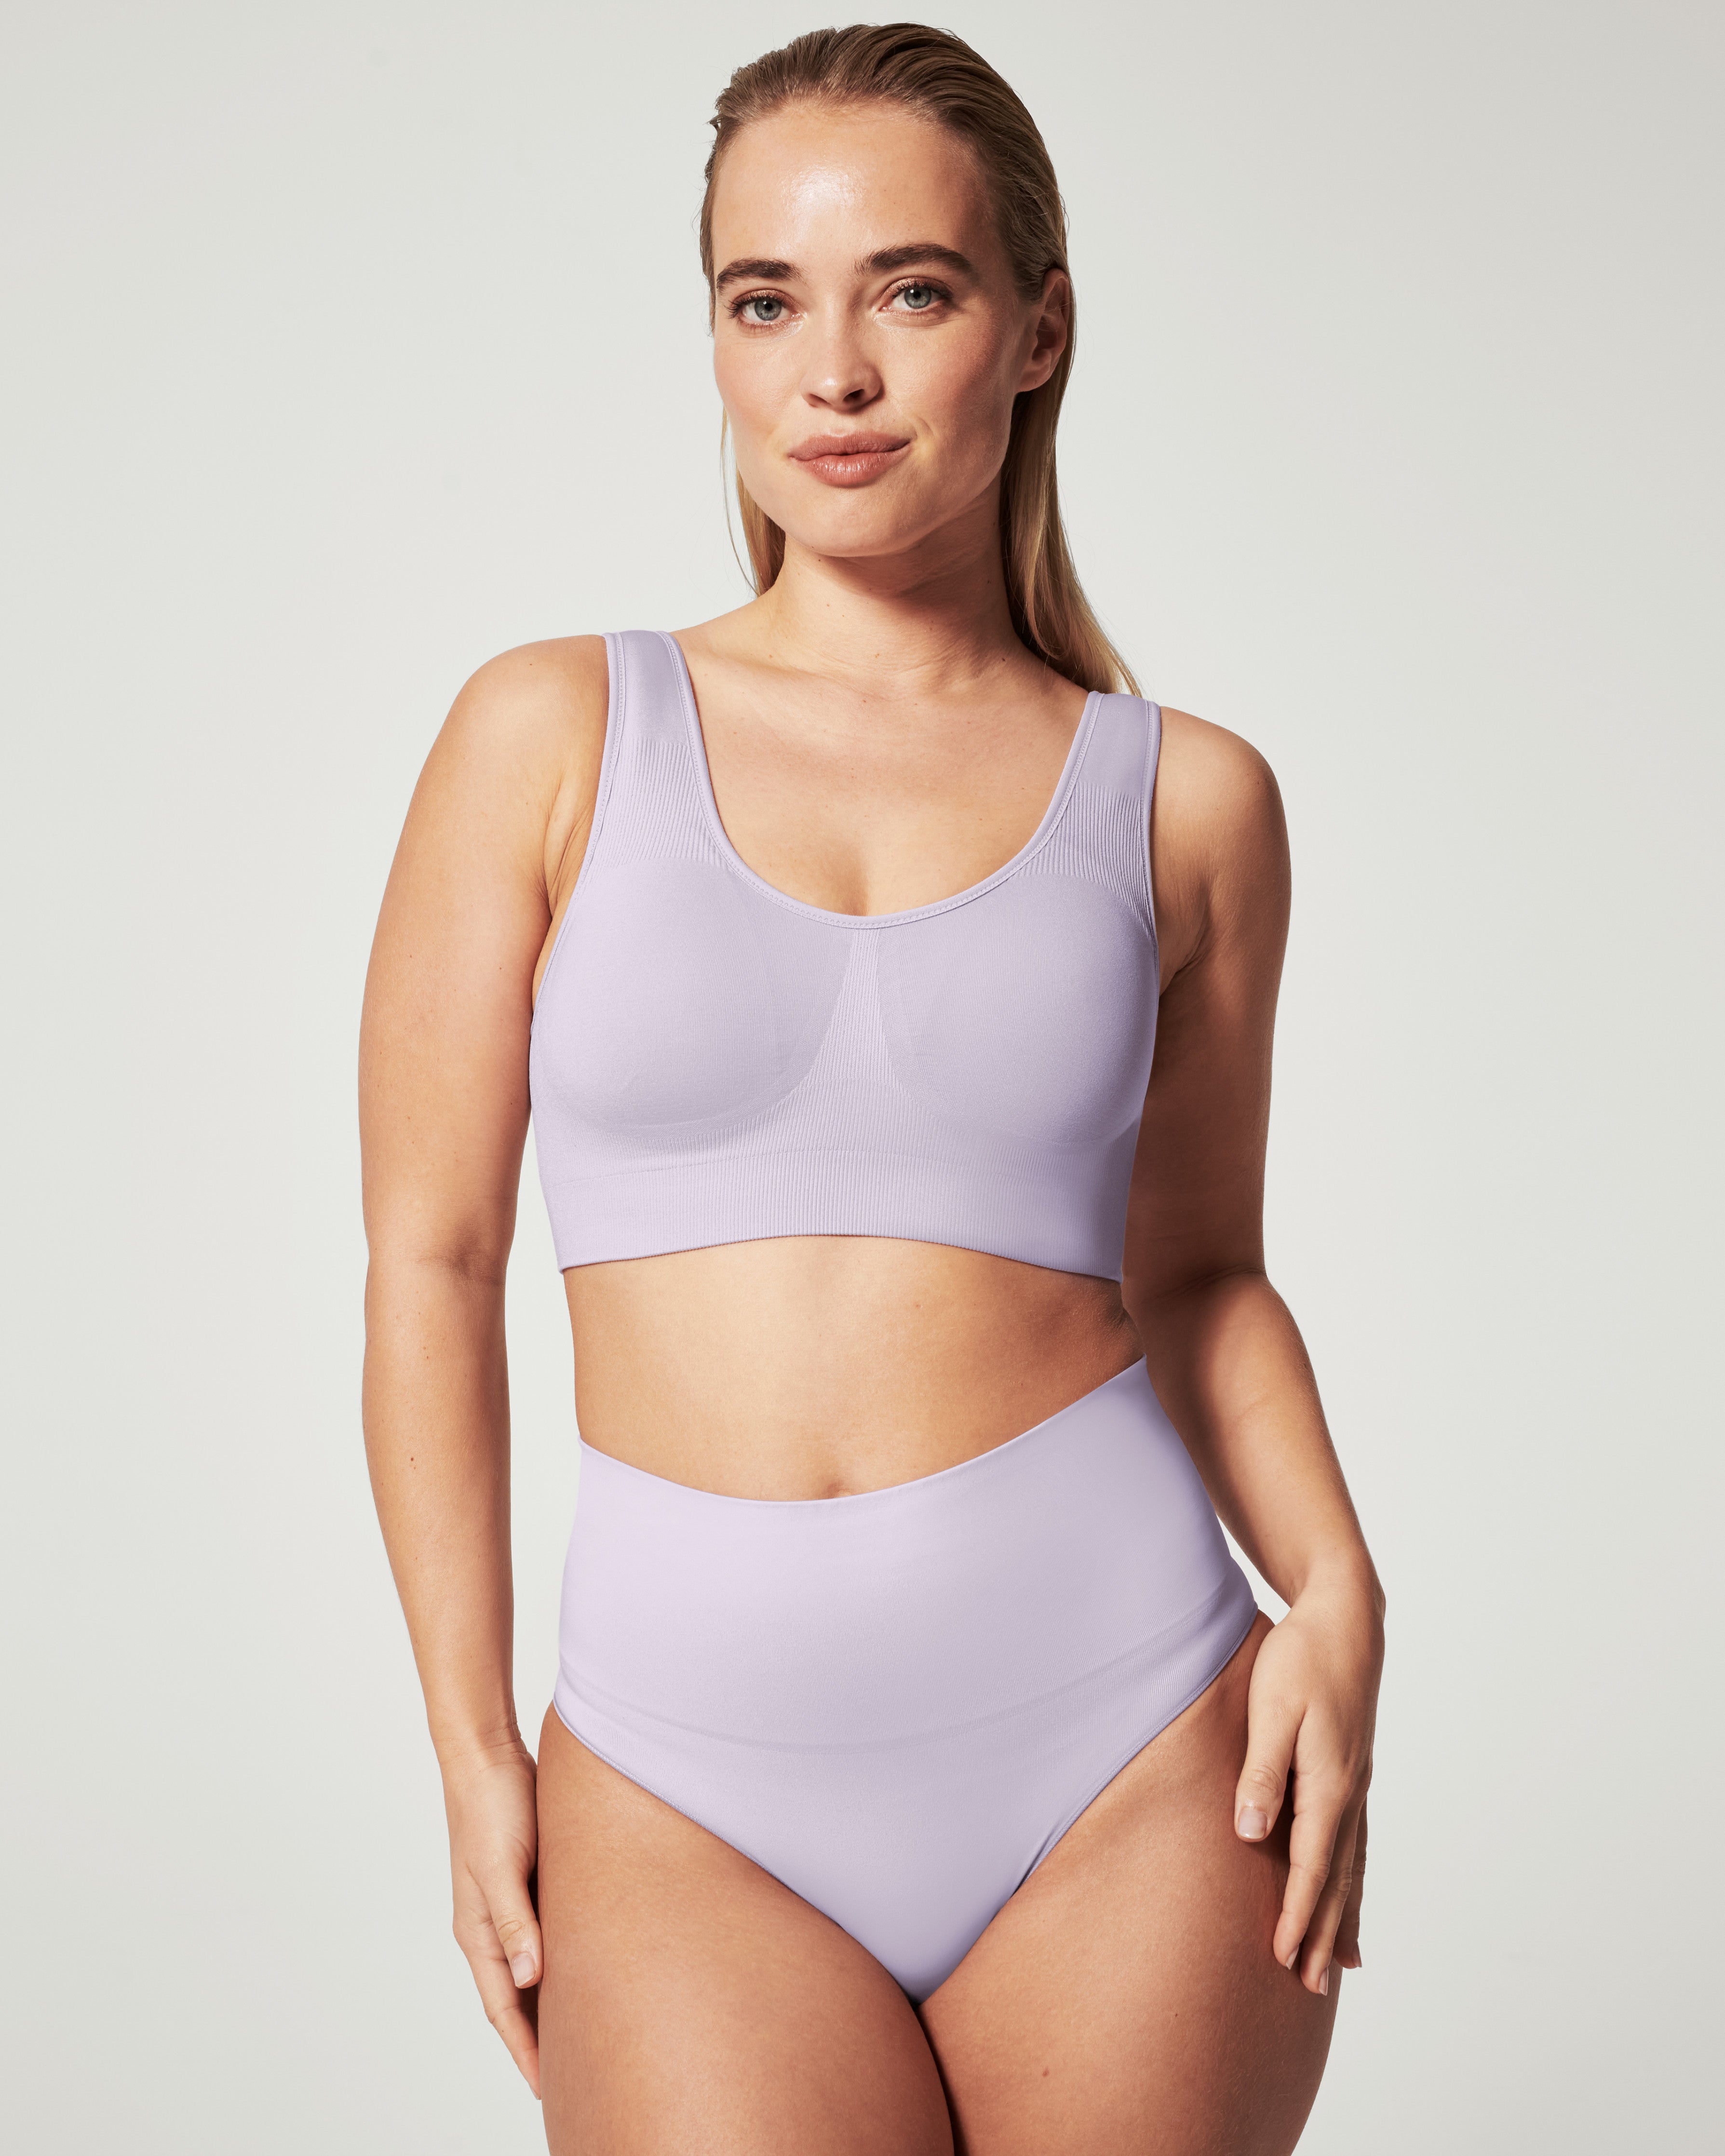 Spanx's Push-Up Bra Is So Comfy, It's Named After Pillows — and